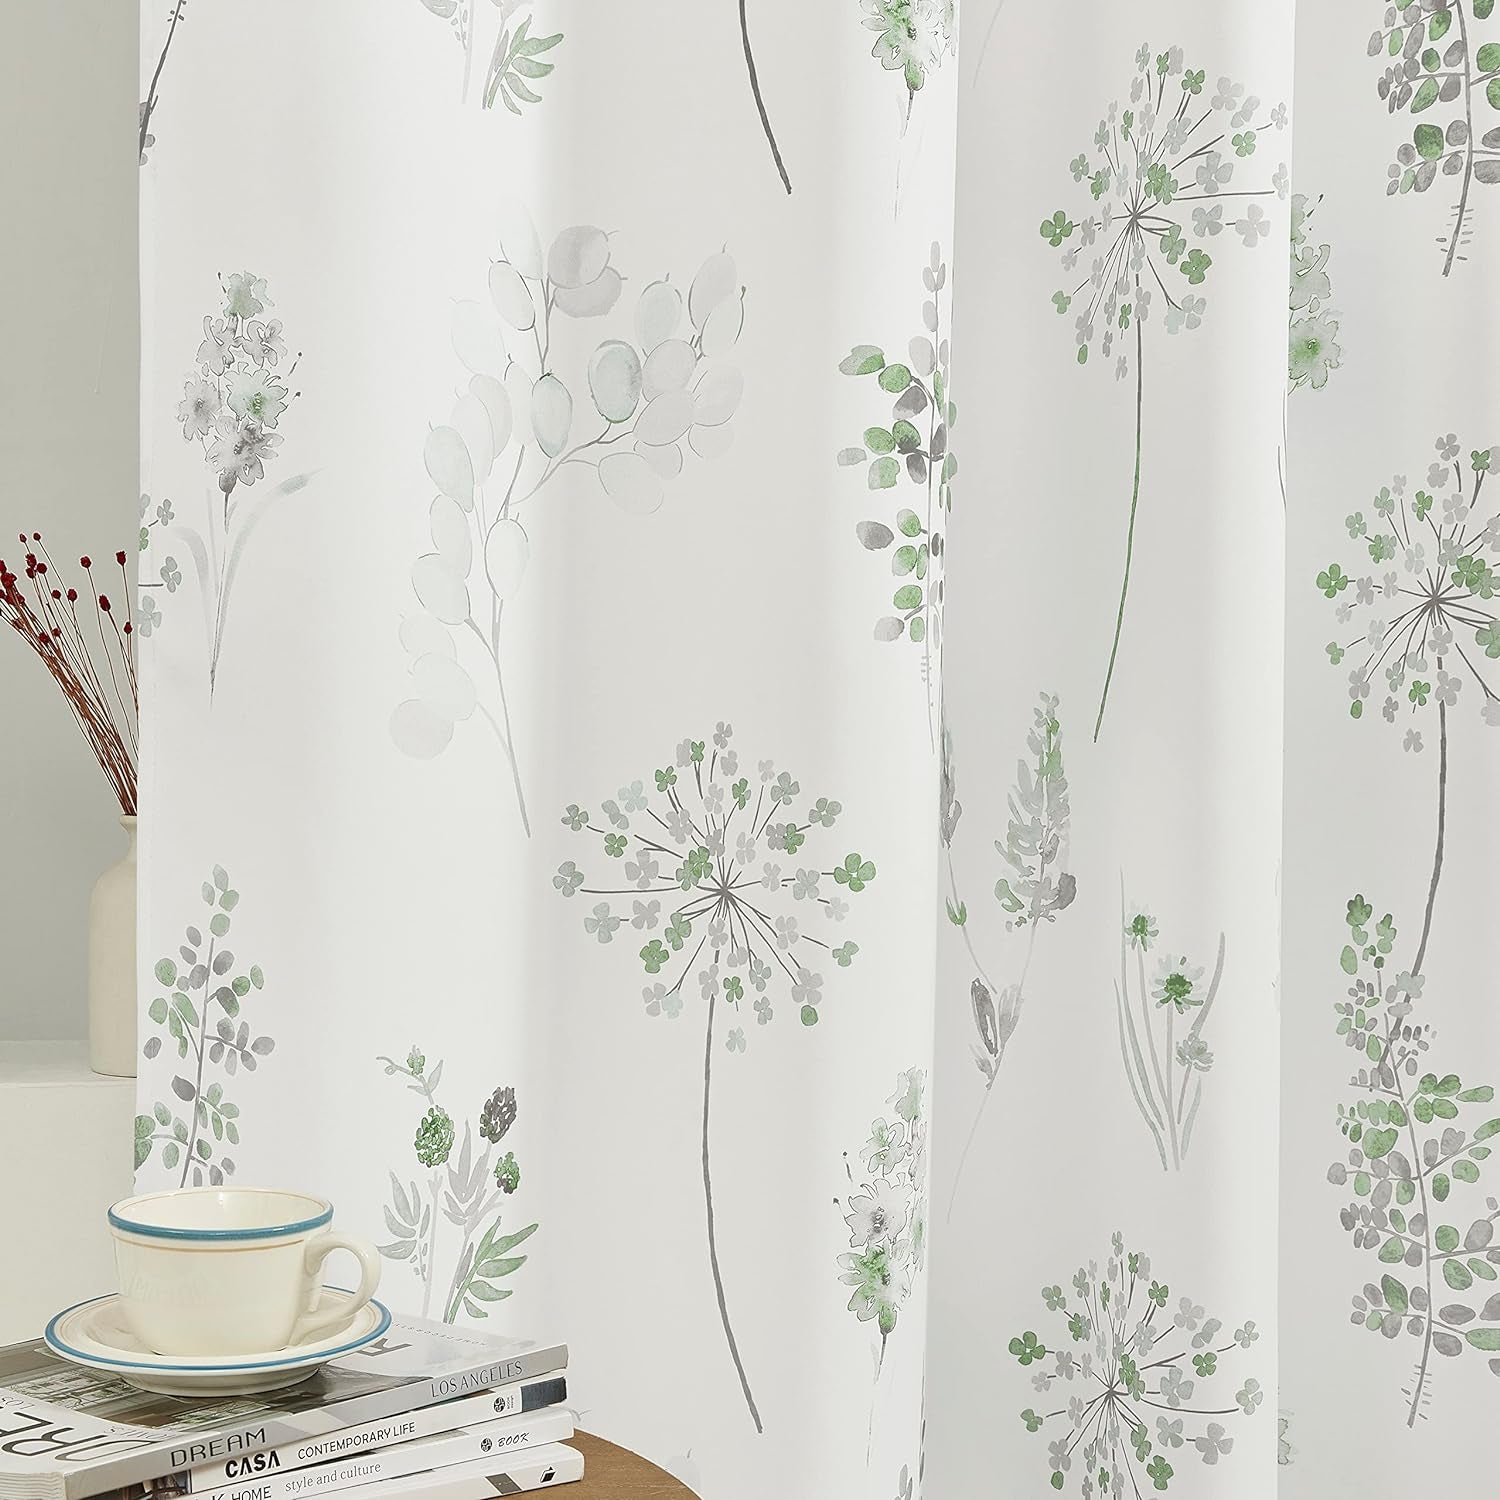 XTMYI 63 Inch Length Sage Green Window Curtains for Bedroom 2 Panels,Room Darkening Watercolor Floral Leaves 80% Blackout Flowered Printed Curtains for Living Room with Grommet,1 Pair Set  XTMYI   